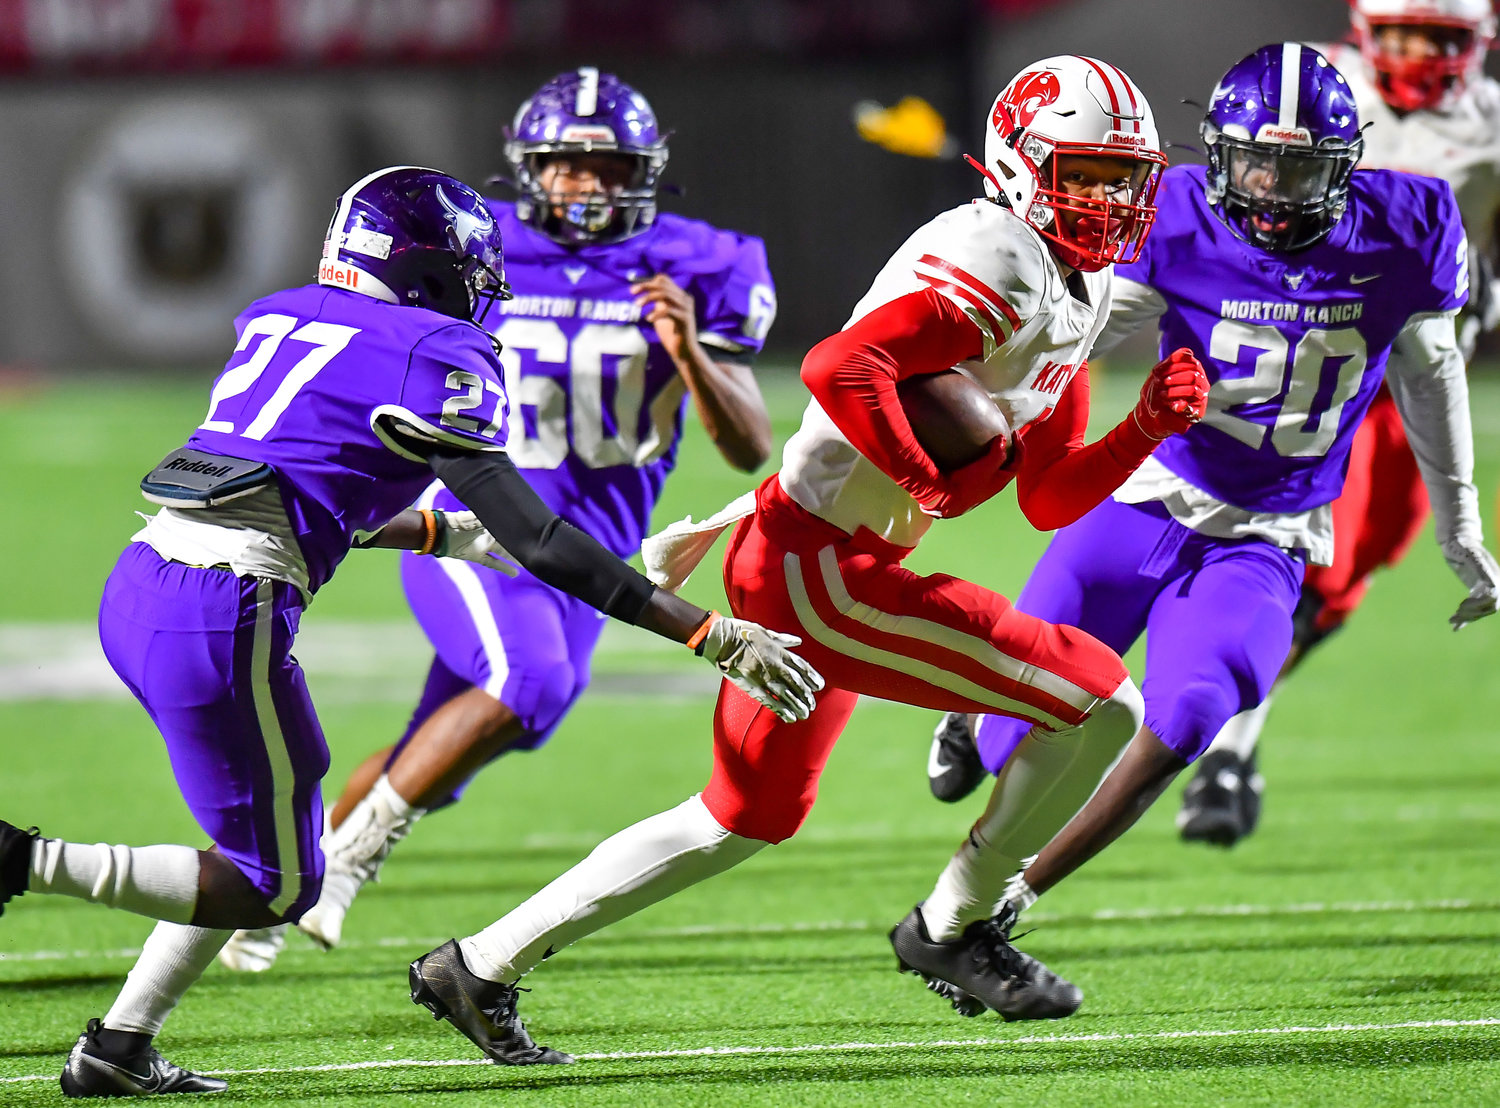 Katy, Tx. Nov 5, 2021: Katy's Nic Anderson #4 carries the ball during a conference game between Katy and Morton Ranch at Legacy Stadium in Katy. (Photo by Mark Goodman / Katy Times)